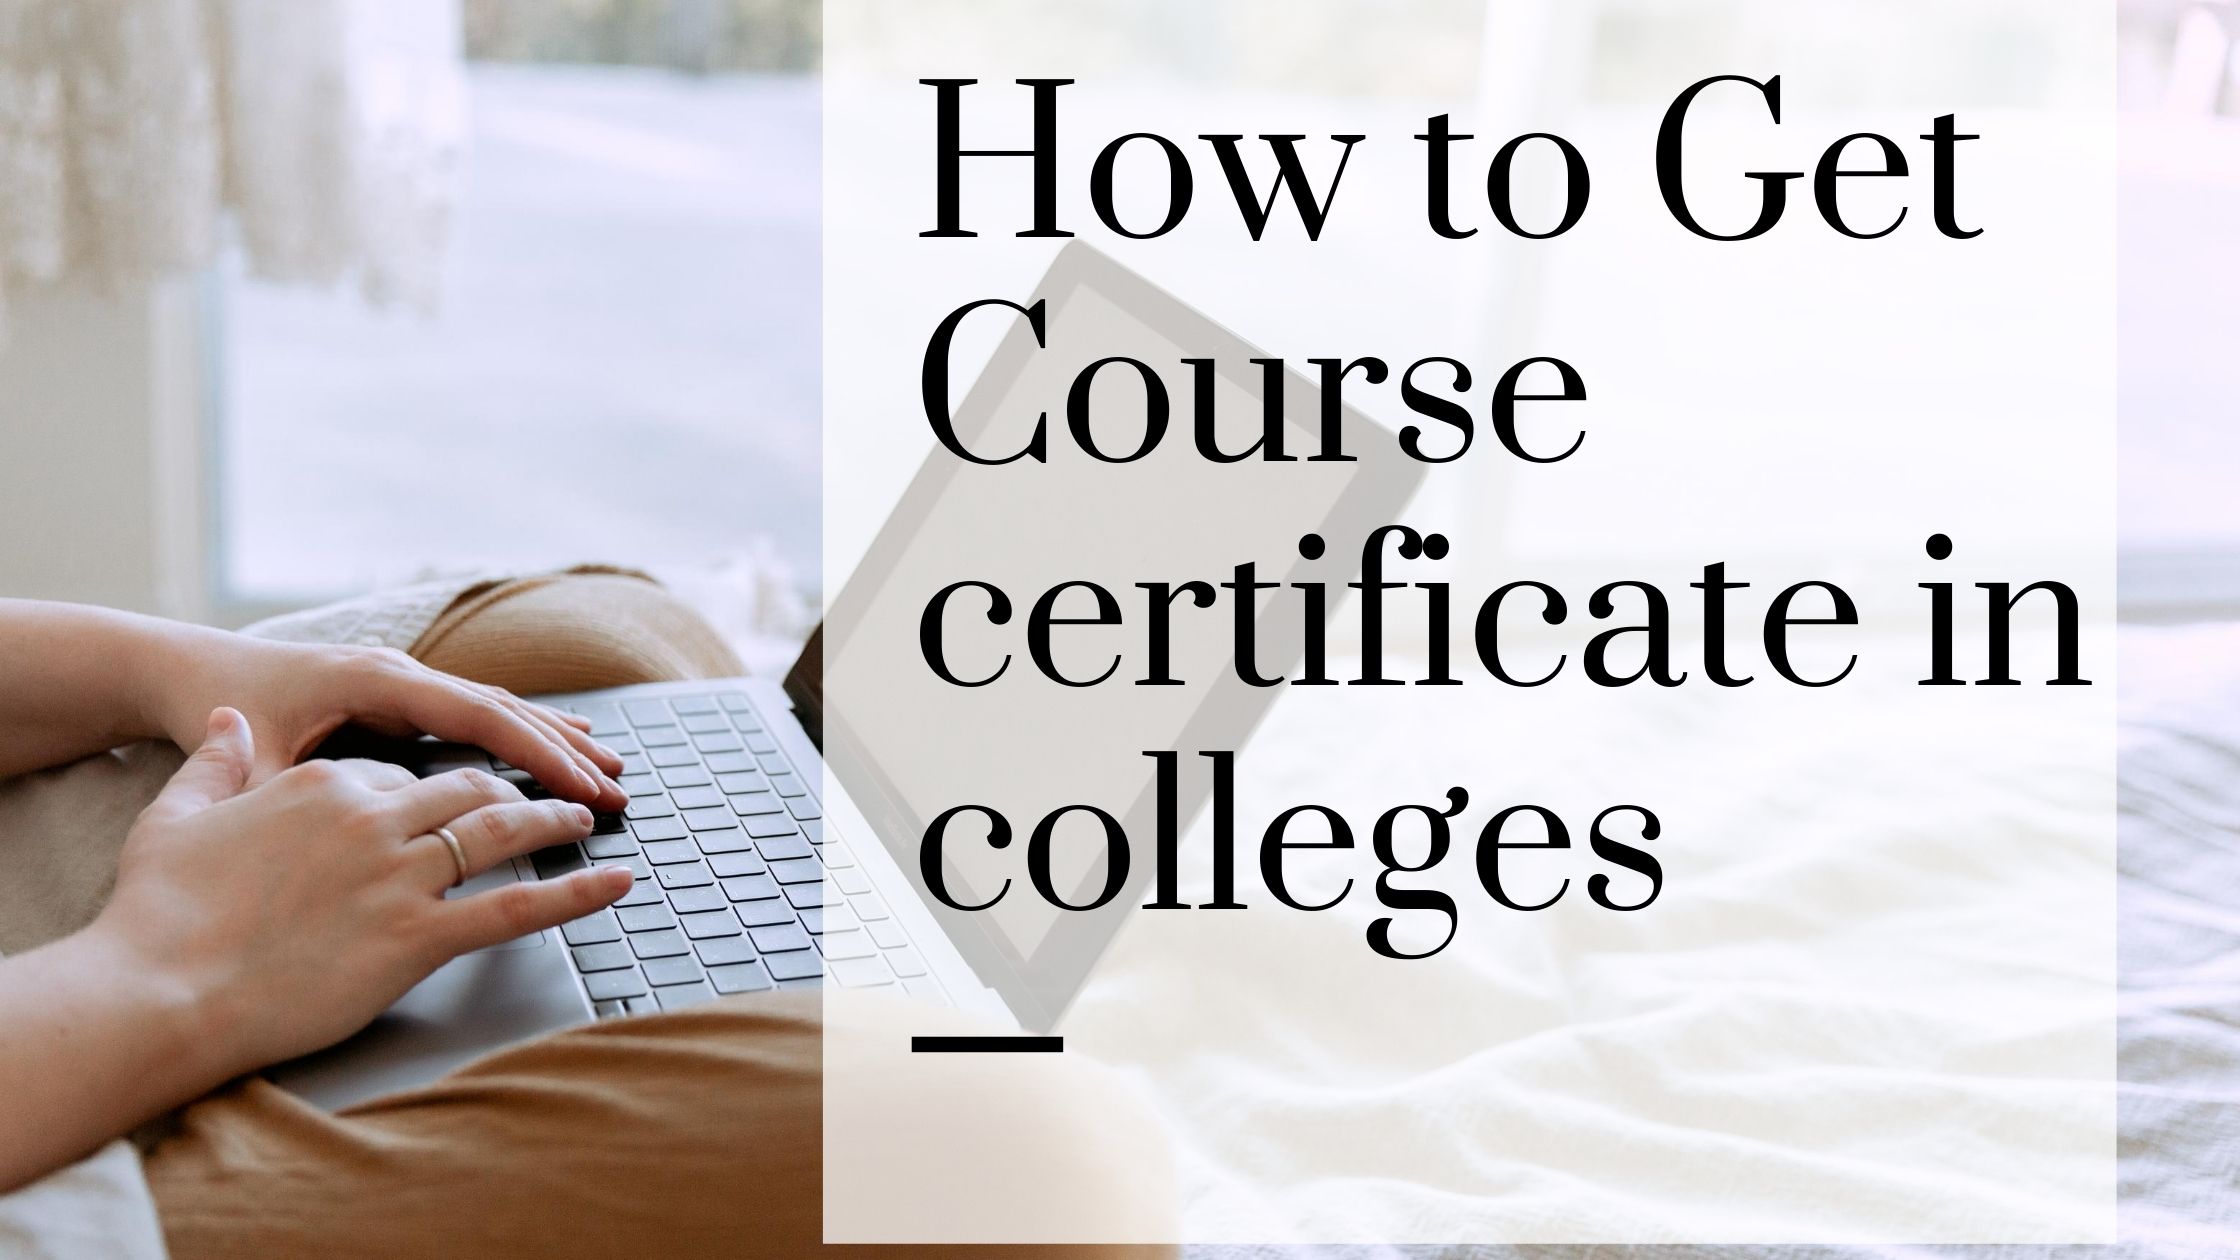 How to get a course certificate in college? Certificate Importance